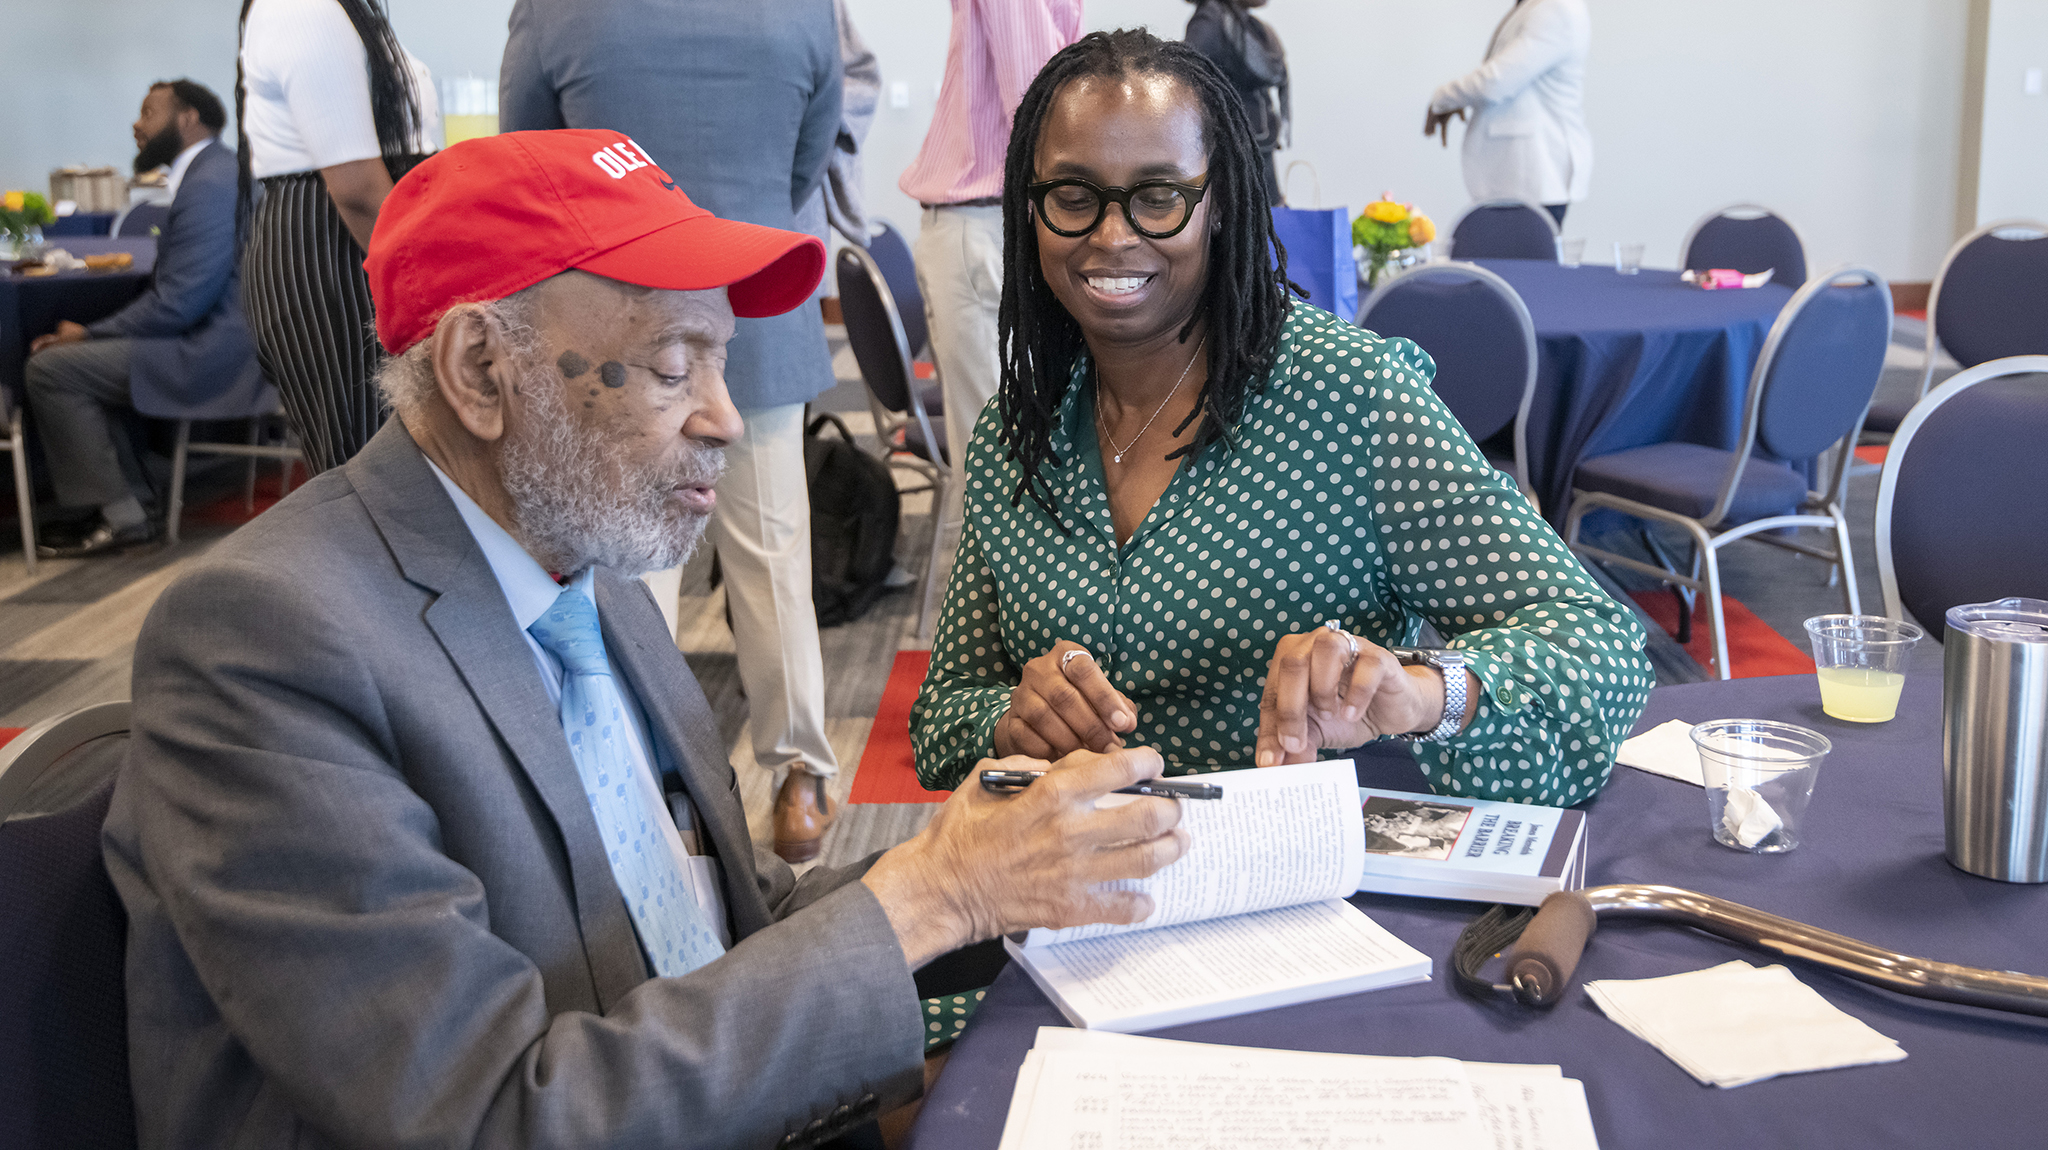 James Meredith (left), who enrolled as the university’s first Black student in 1962, signs a copy of ‘James Meredith: Breaking the Barrier’ following the Honoring Diversity Excellence ceremony, a final event of the 60th anniversary of integration commemoration. The ceremony in the Ole Miss Student Union Ballroom honored faculty and staff achievements in diversity and inclusion. Photo by Srijita Chattopadhyay/Ole Miss Digital Imaging Services